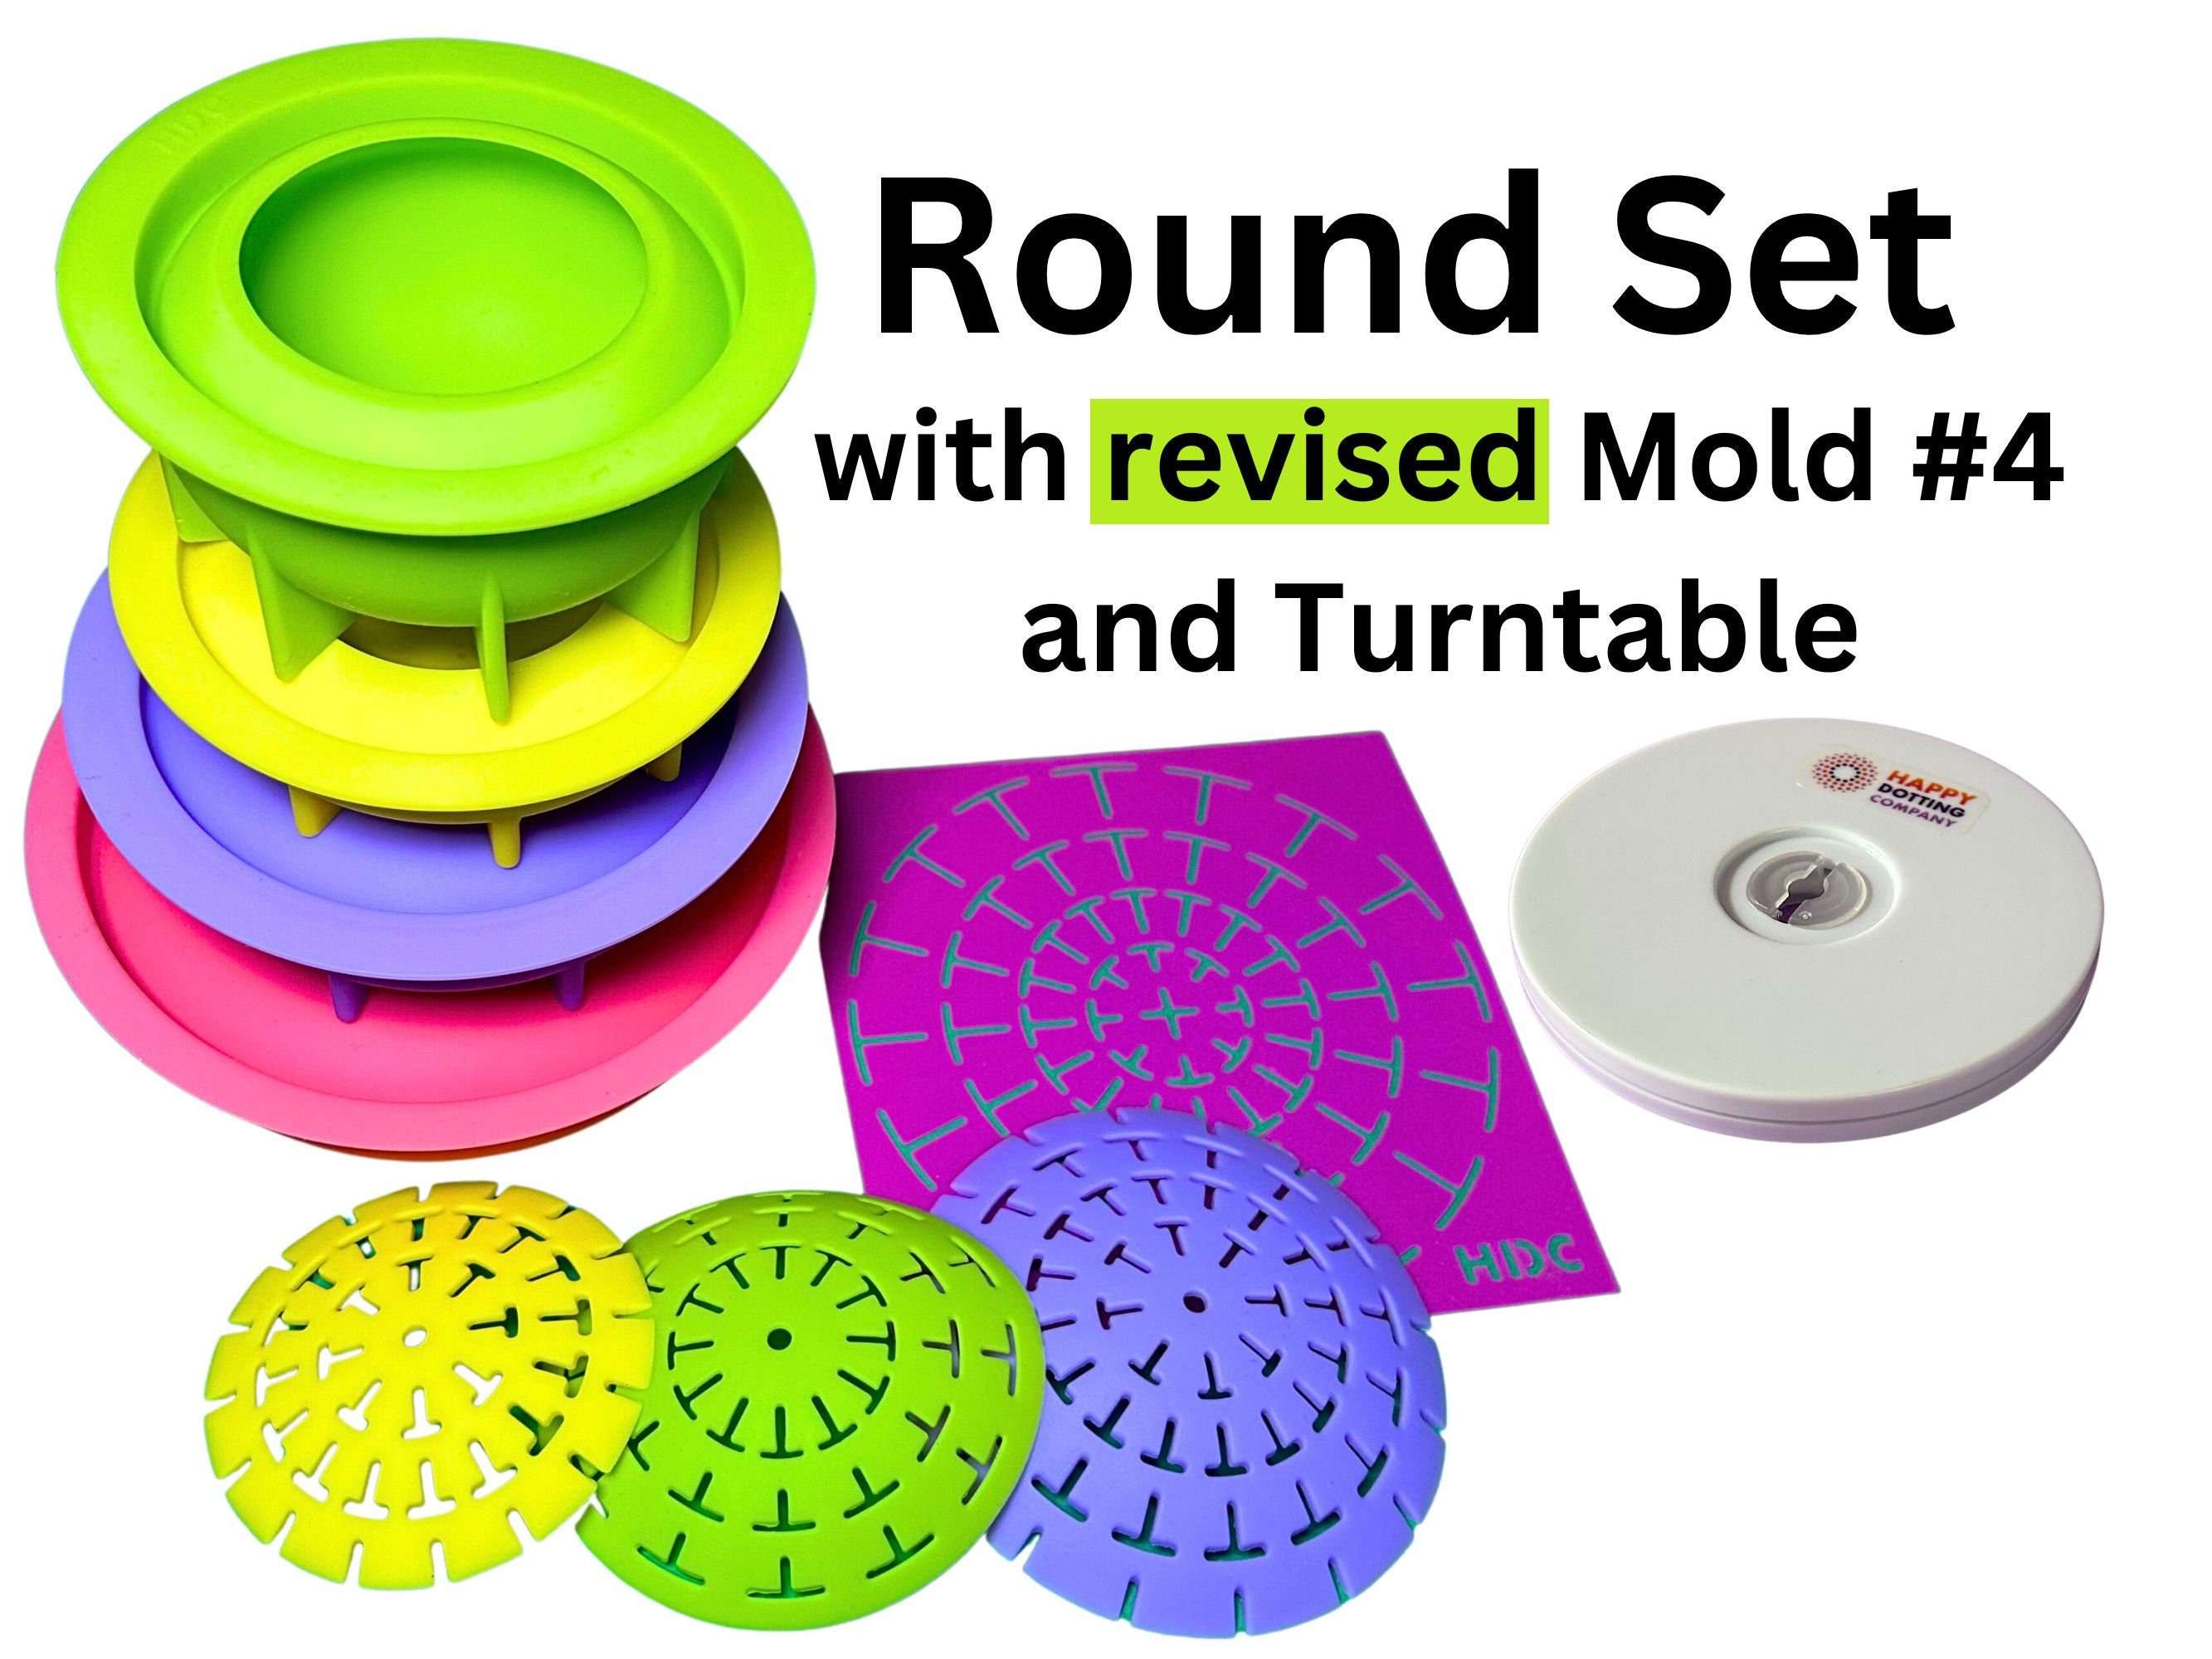 8 Pc Round Art Stone Molds Combo Deal Includes Dome Templates and Turntable Happy  Dotting Company Silicone Silicon Moulds Mandala Dot Art 